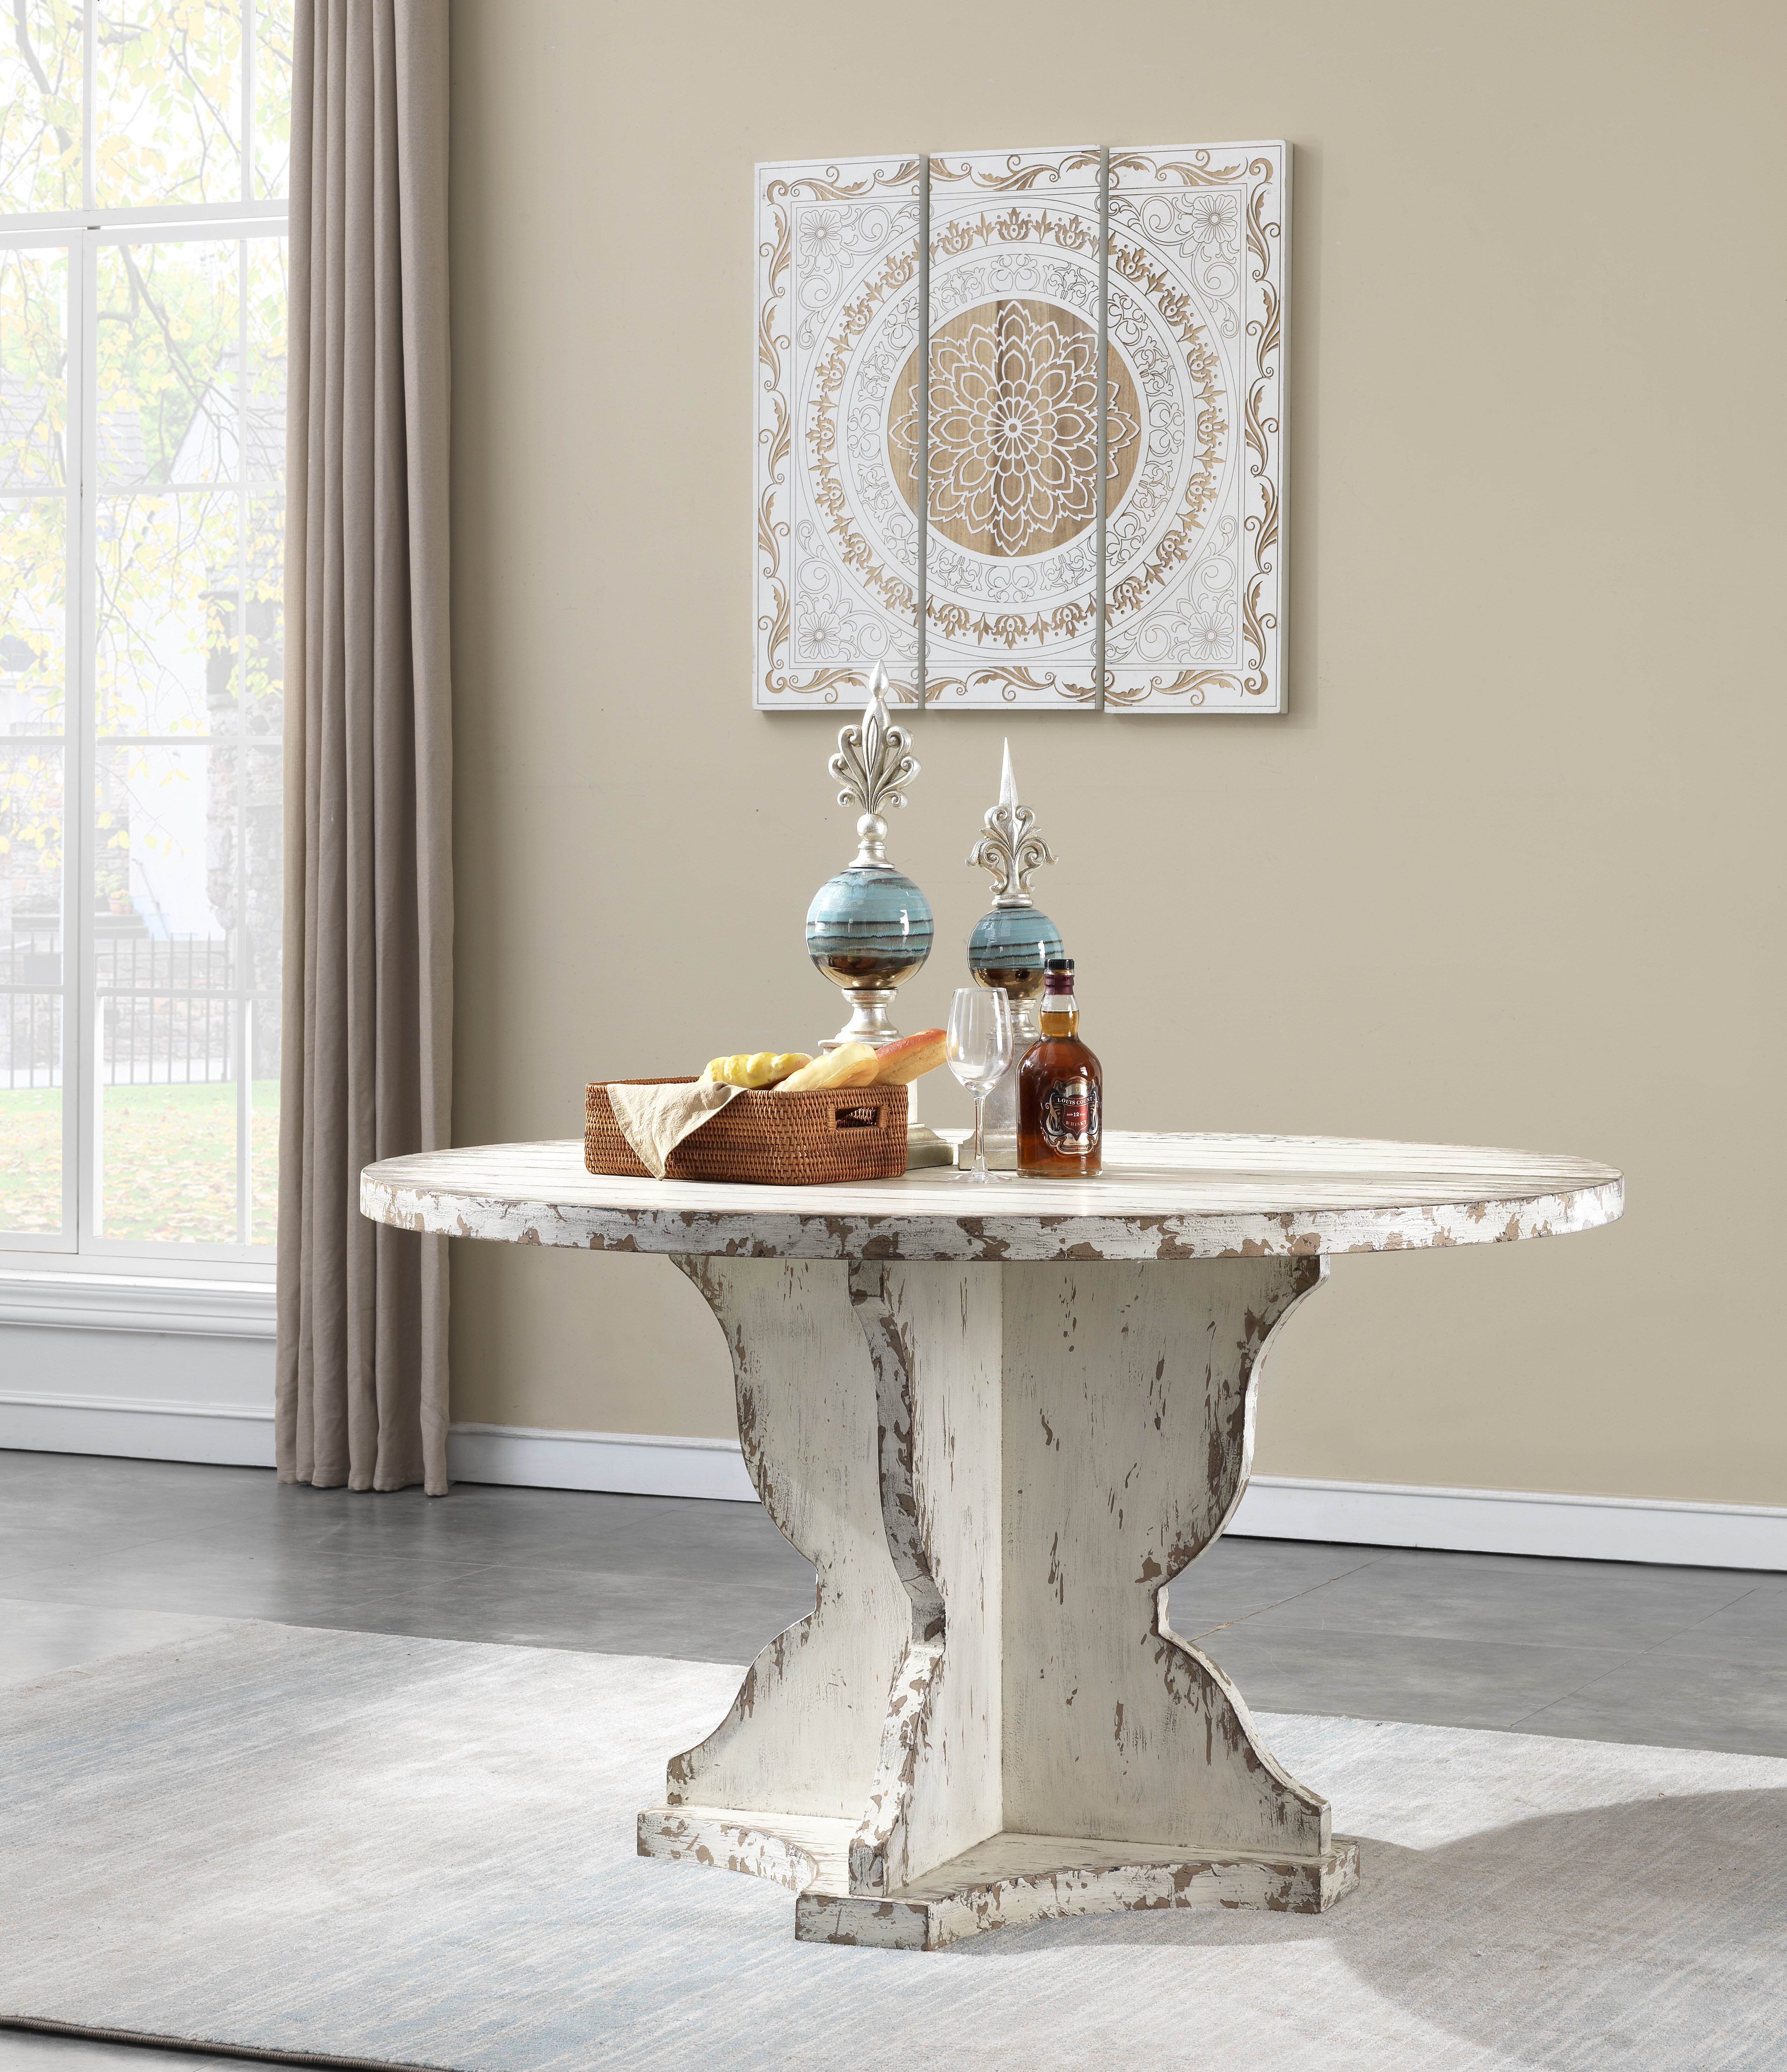 54 Inches Round Dining Tables You Ll Love In 2021 Wayfair